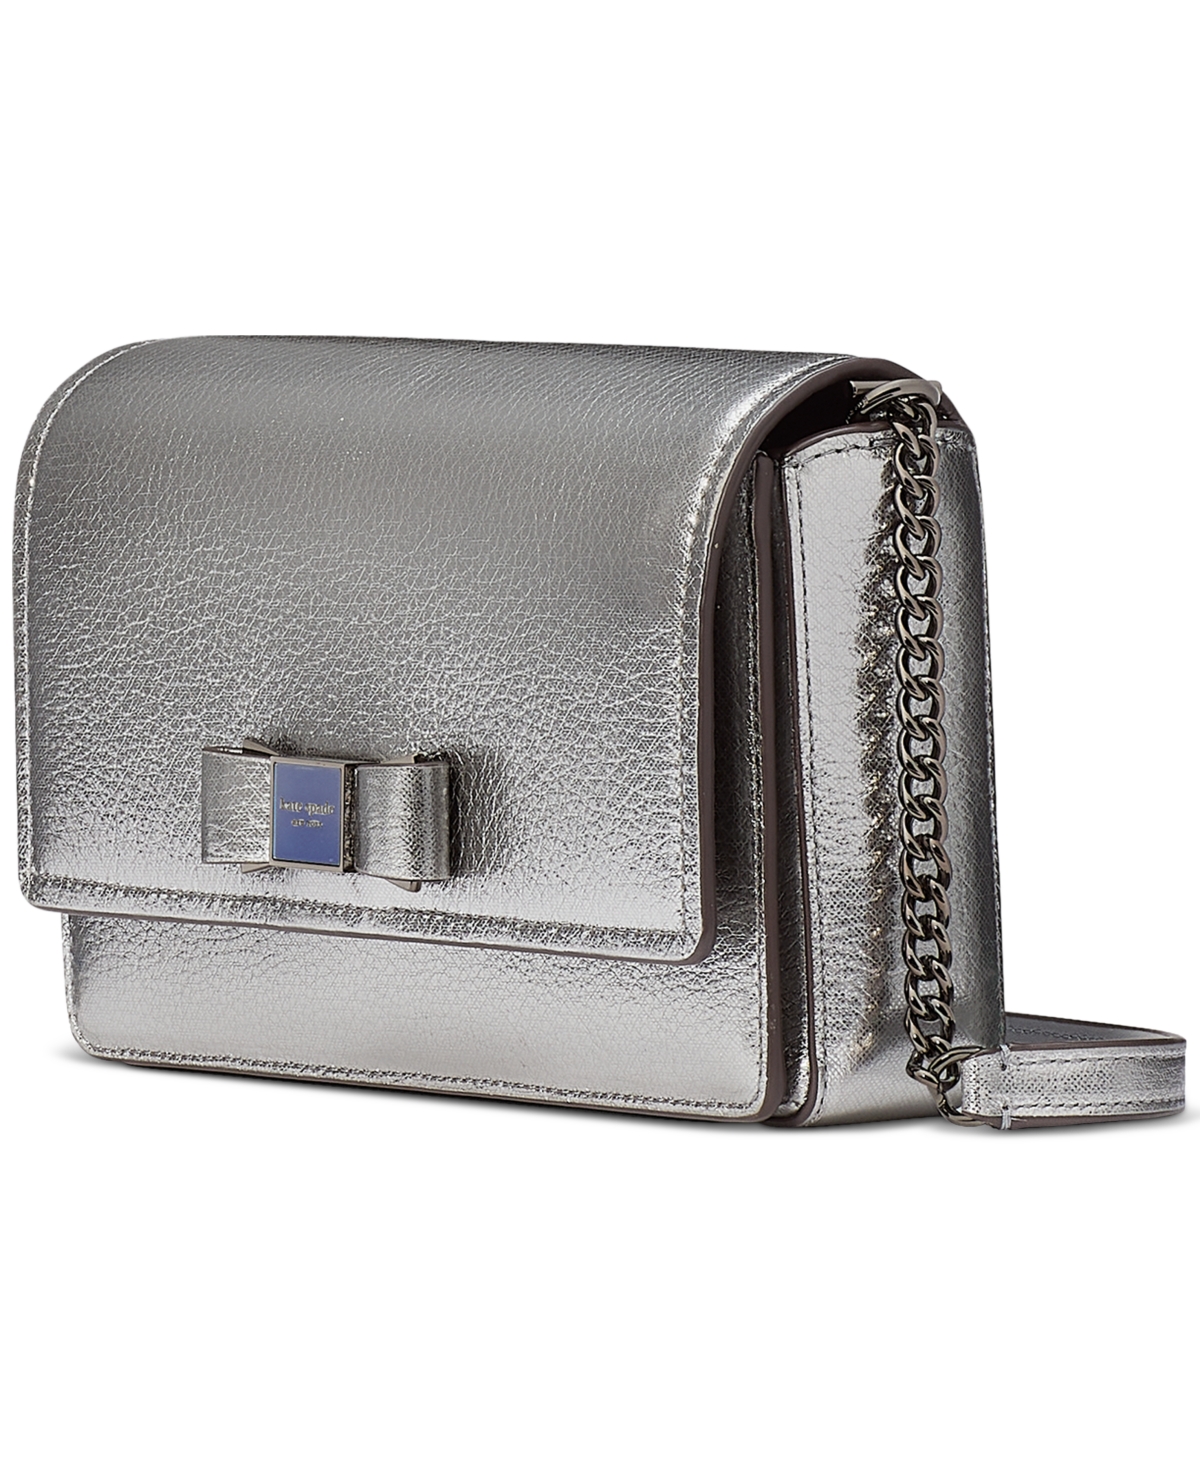 Kate Spade Morgan Bow Embellished Metallic Leather Flap Chain Wallet In Silver